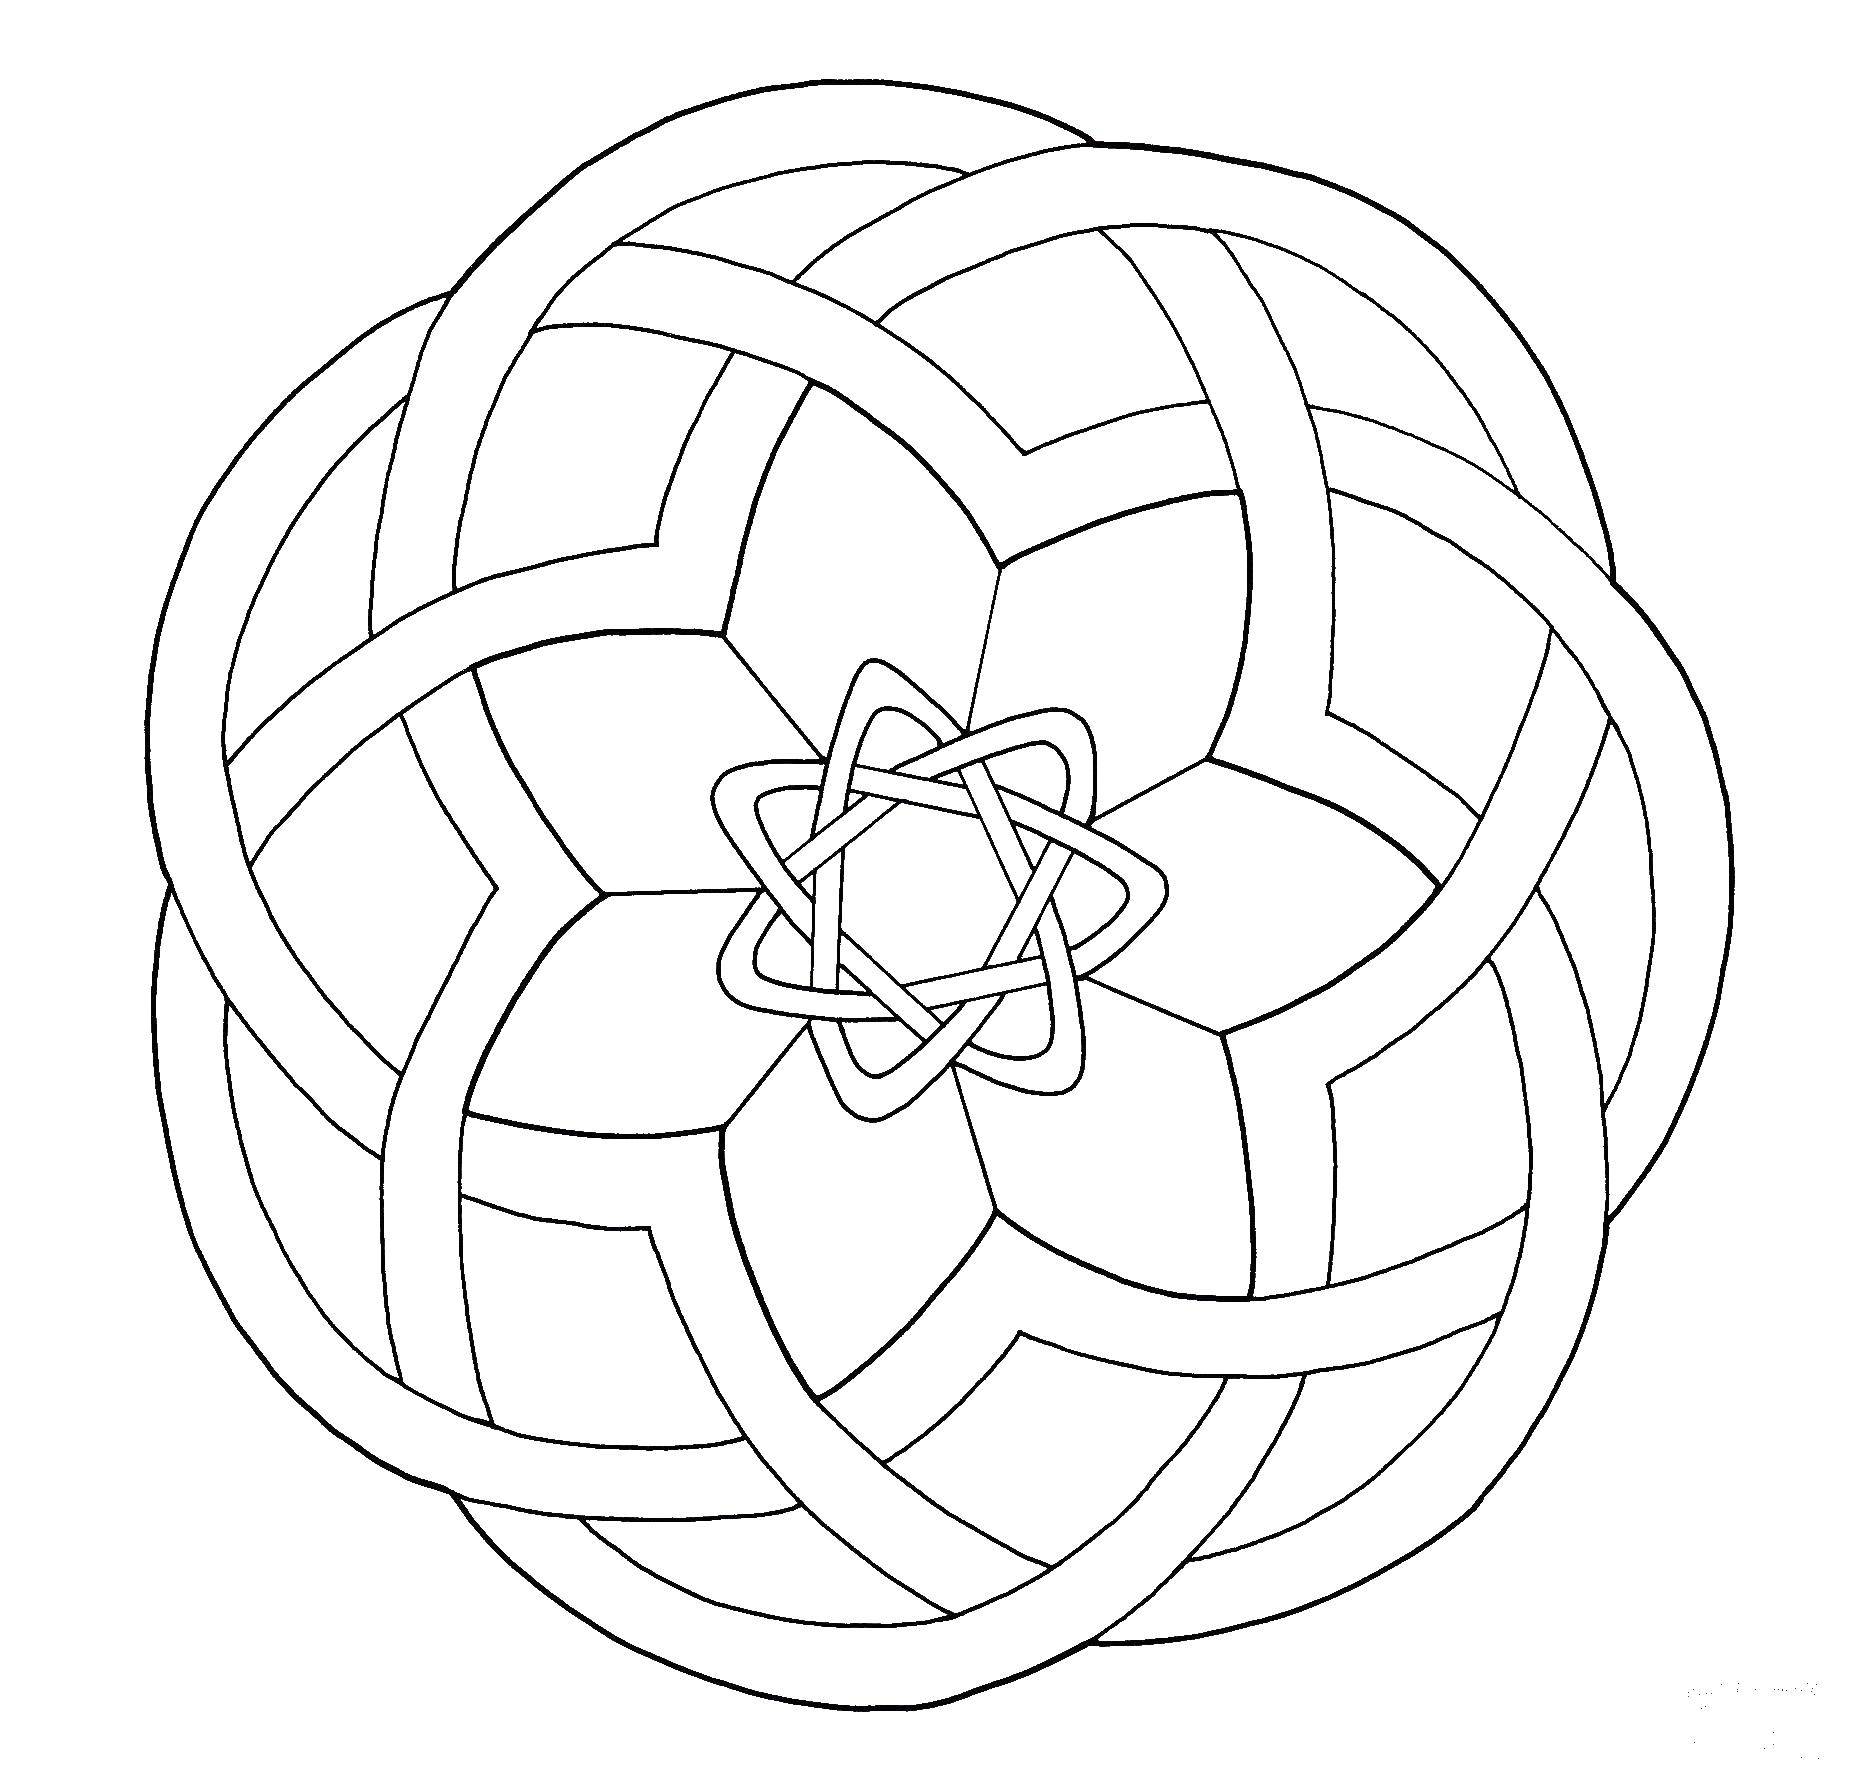 Unique patterns and ornaments for coloring for children